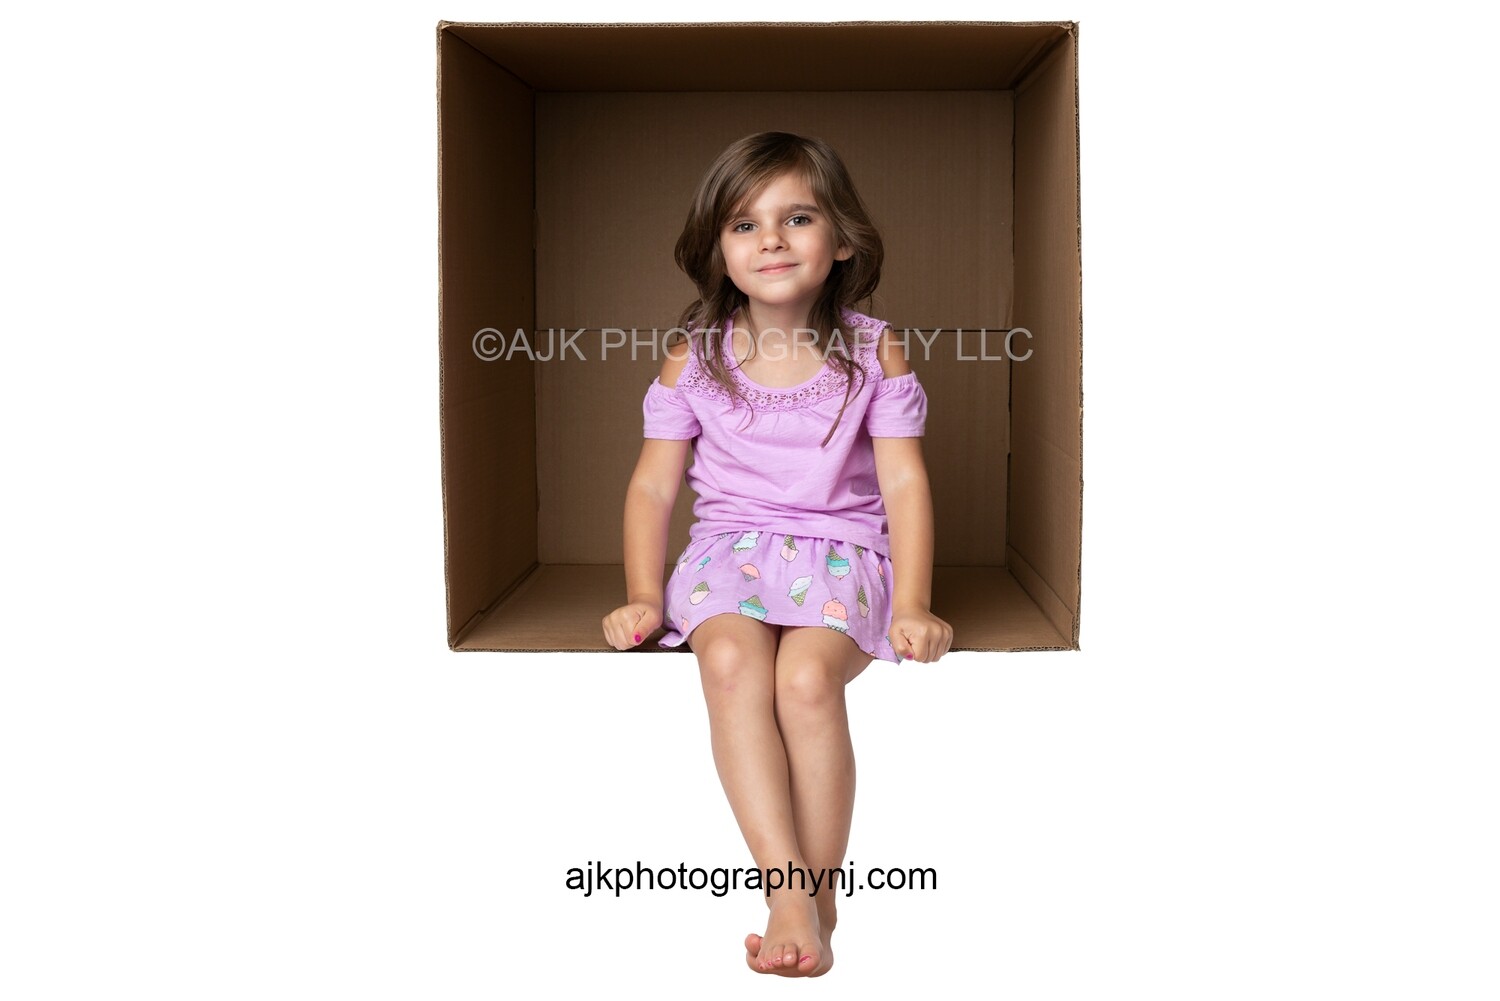 1 cardboard box PNG Digital Overlay, composite, by Eric Miele from AJK Photography